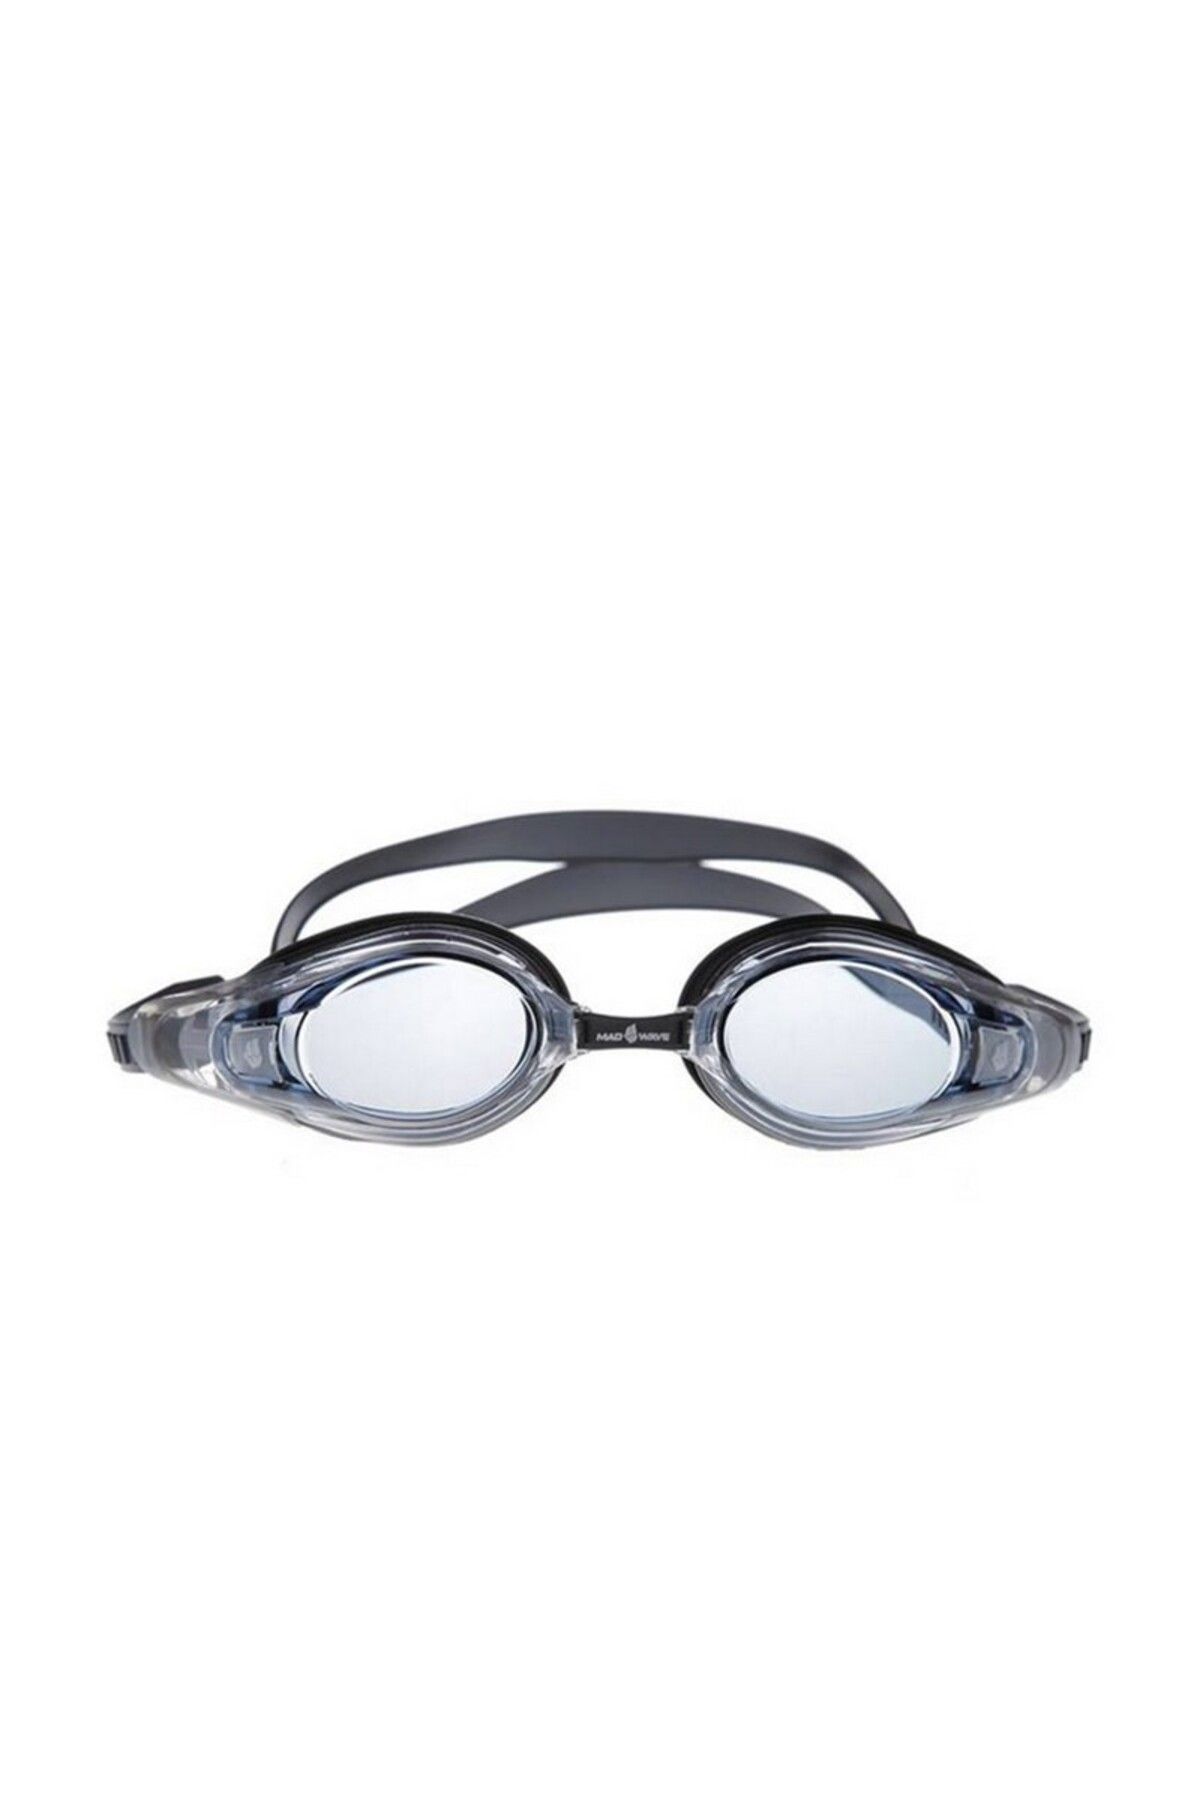 Mad Wave Vision Goggles Optic Envy Automatic